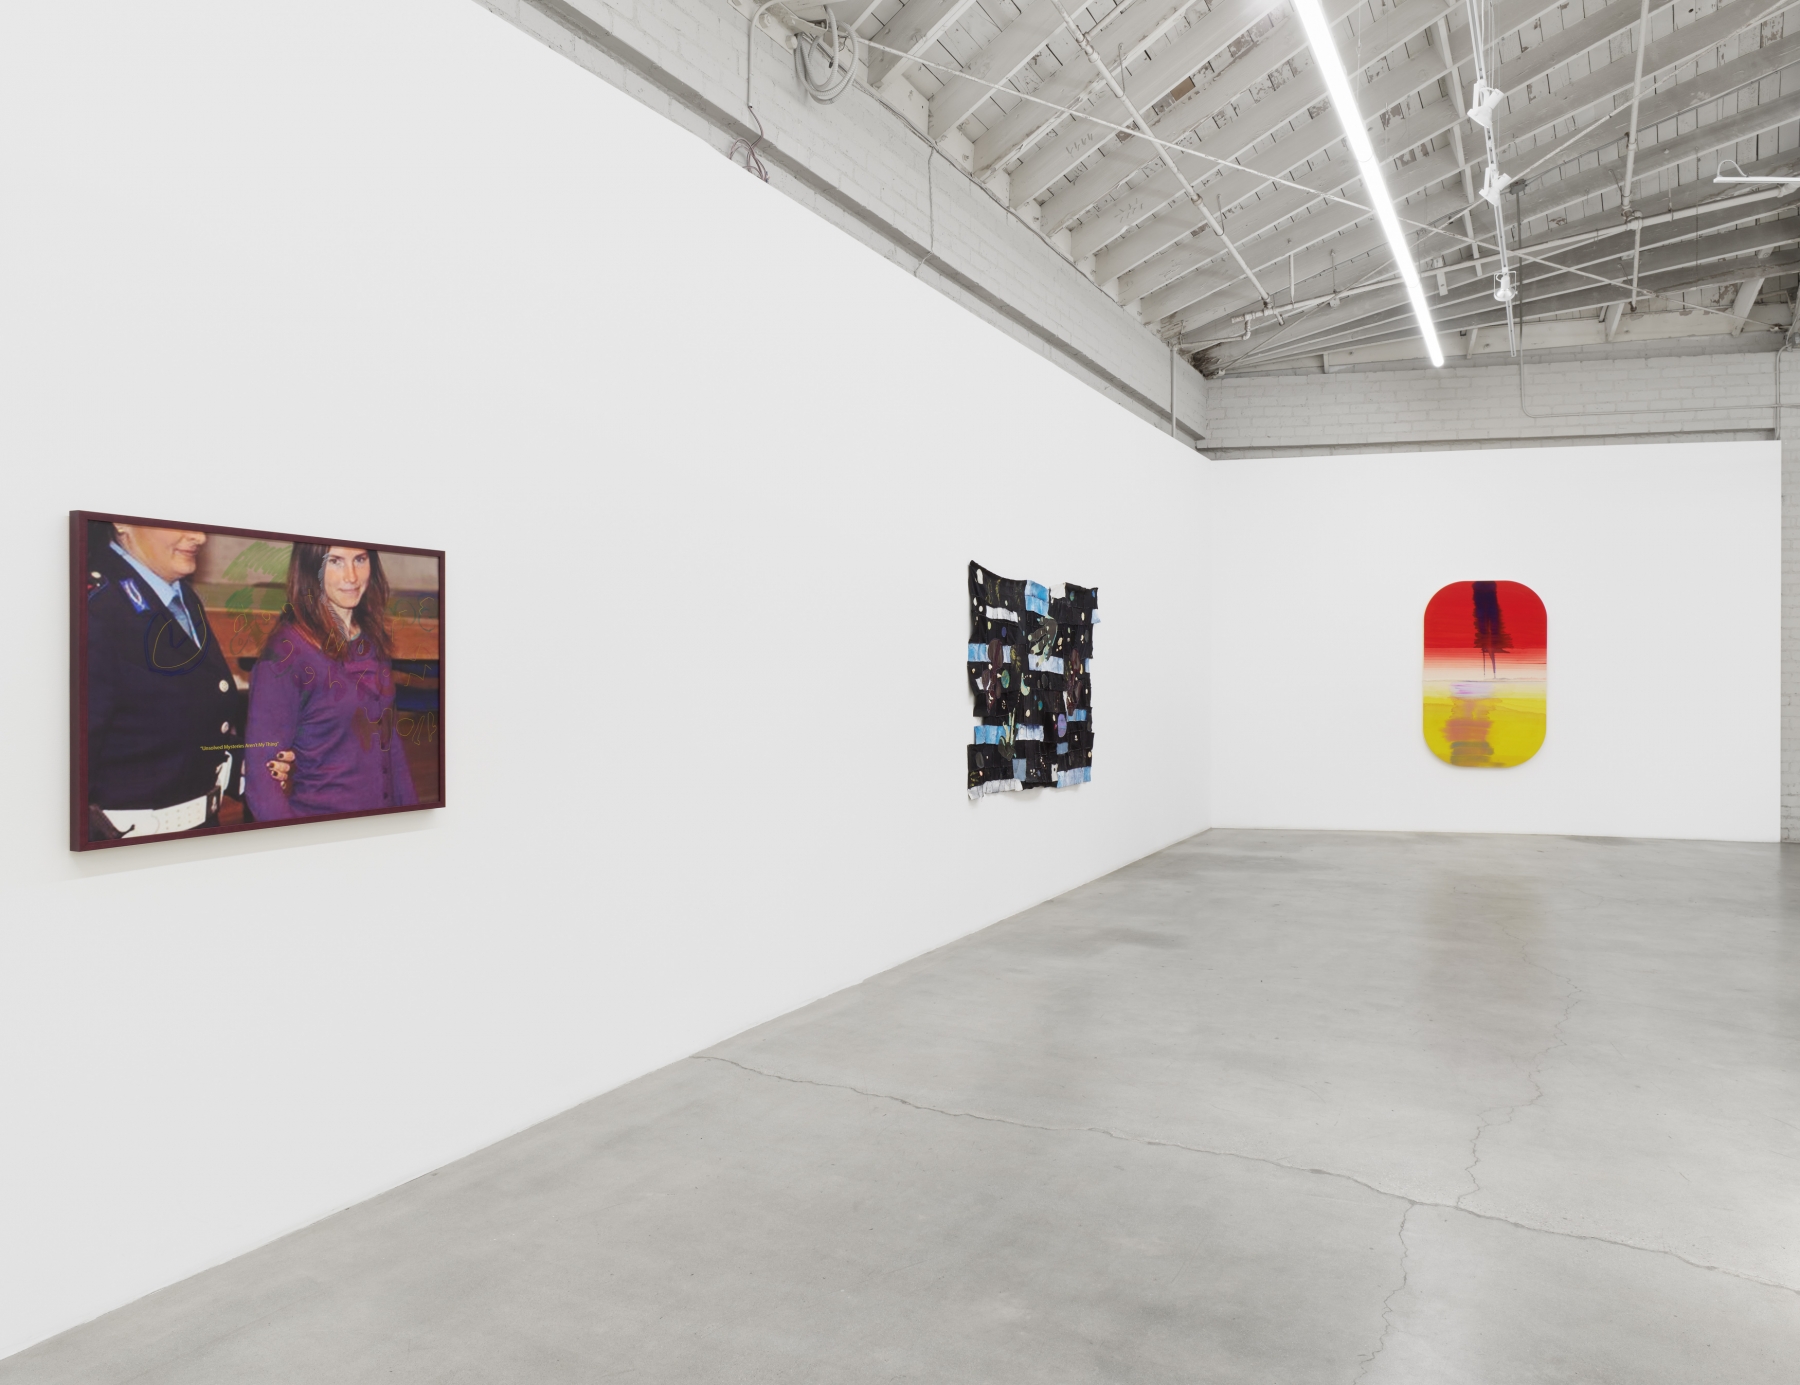 Installation view of Majeure Force, Part Two, featuring works by Cara Benedetto, Tau Lewis, and Elaine Stocki. 